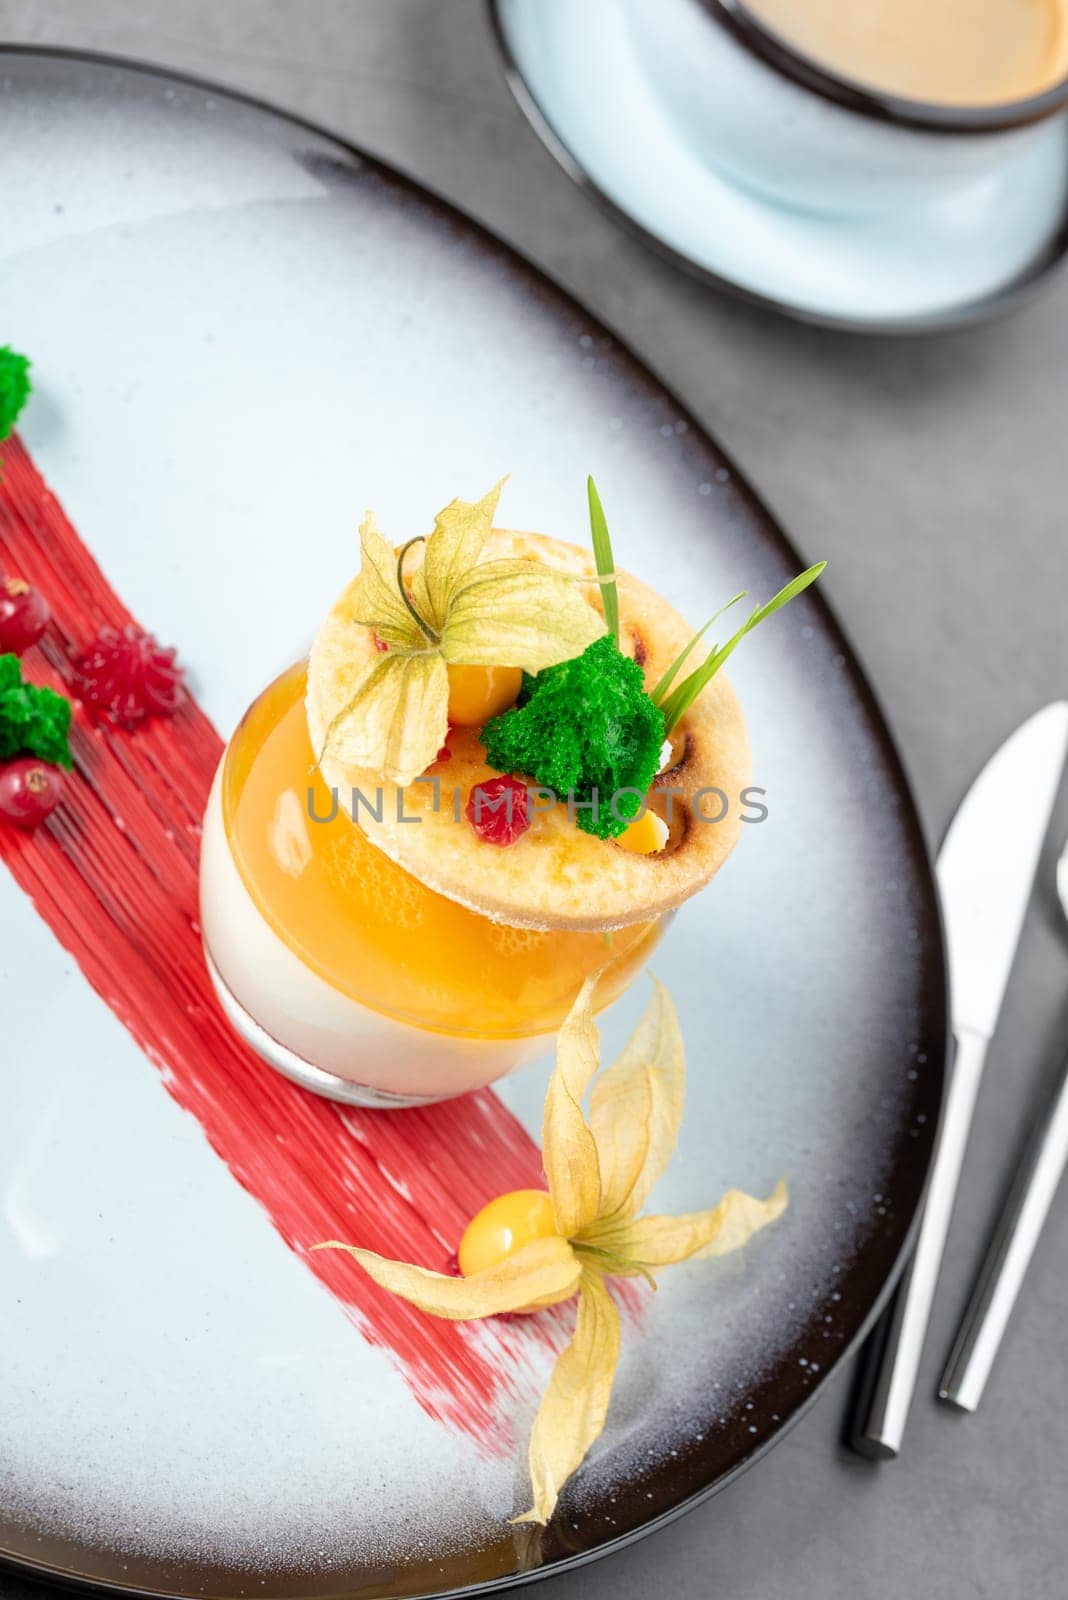 Panna cotta on stone table in fine dining restaurant by Sonat